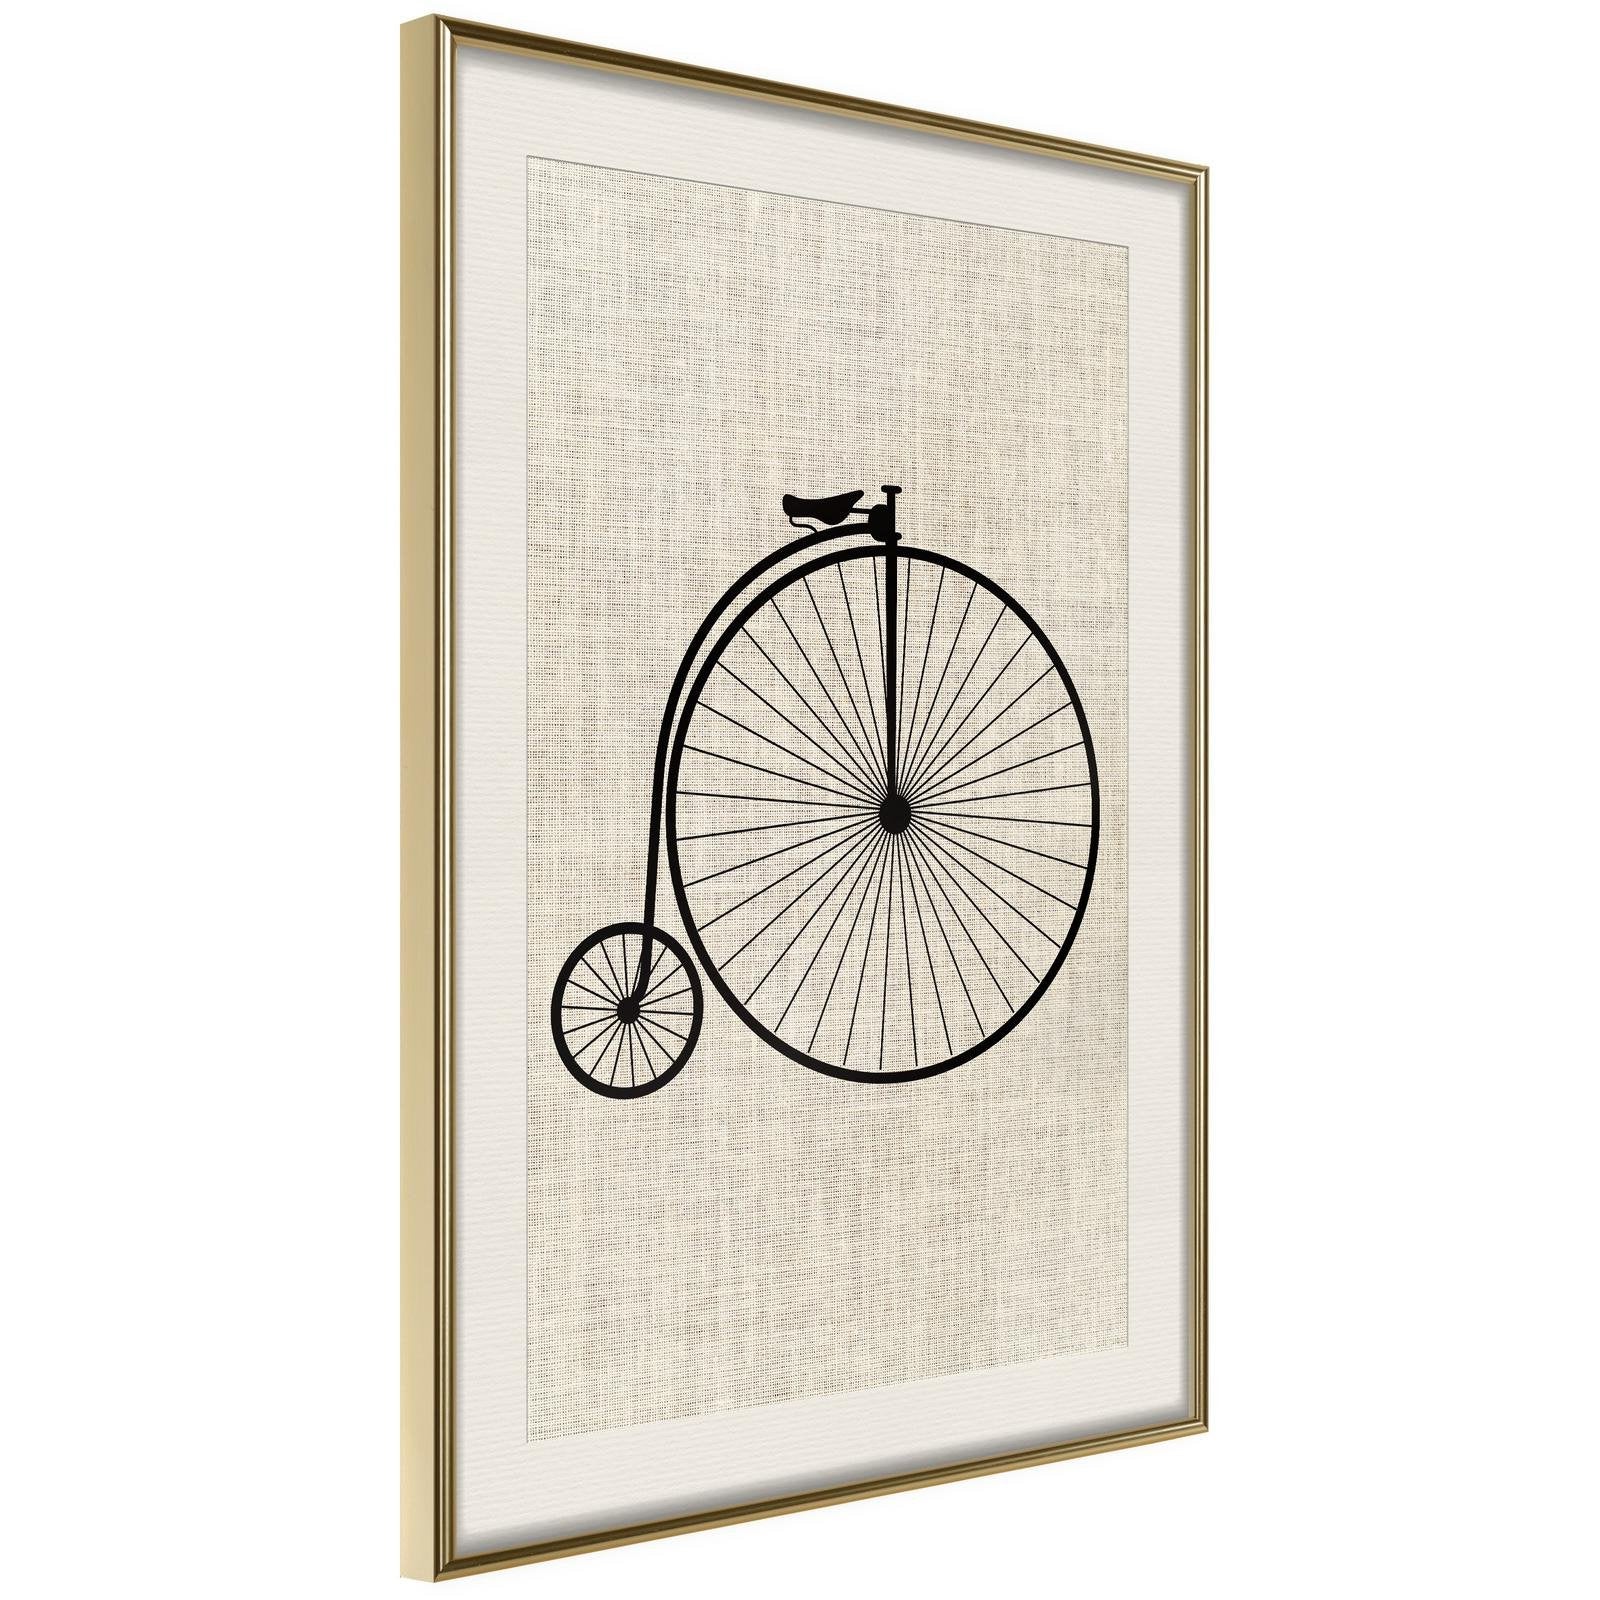 Inramad Poster / Tavla - Penny-Farthing-Poster Inramad-Artgeist-20x30-Guldram med passepartout-peaceofhome.se